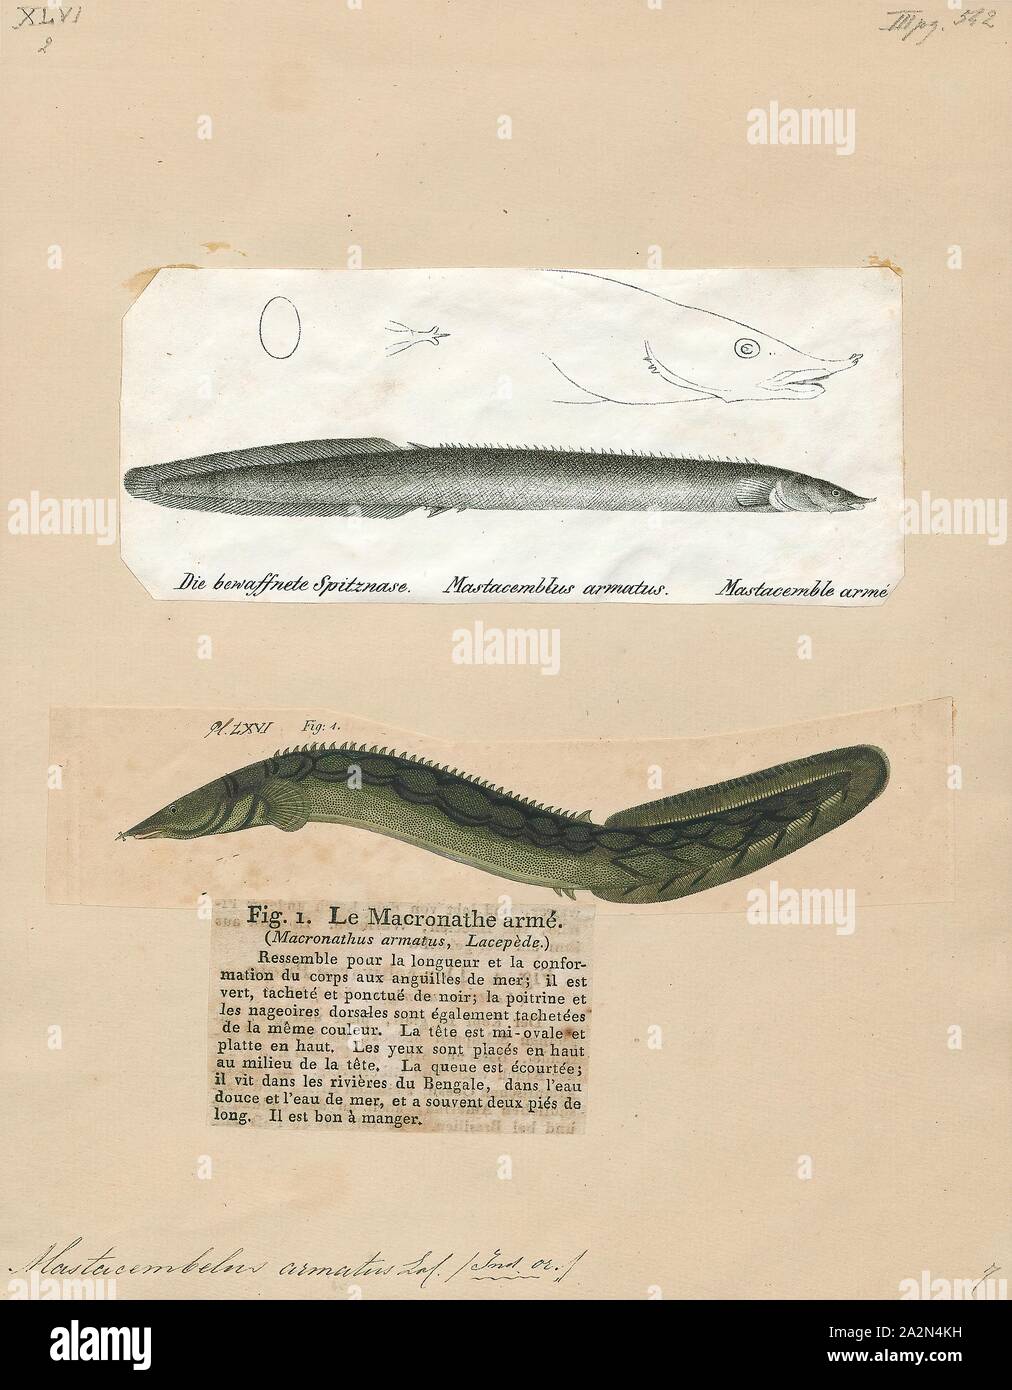 Mastacembelus armatus, Print, The tire track eel (Mastacembelus armatus) is a species of ray-finned, spiny eels belonging to the genus Mastacembelus (Scopoli, 1777) of the family Mastacembelidae, and is native to the riverine fauna of India, Pakistan, Sri Lanka, Thailand, Viet Nam, Indonesia and other parts of South East Asia. The species was named Mastacembelus armatus by Lacepède in 1800. Other common names for this popular aquarium species are zigzag eel, spiny eel, leopard spiny eel and white-spotted spiny eel. This species is not only a popular aquarium fish but also as a food fish in its Stock Photo